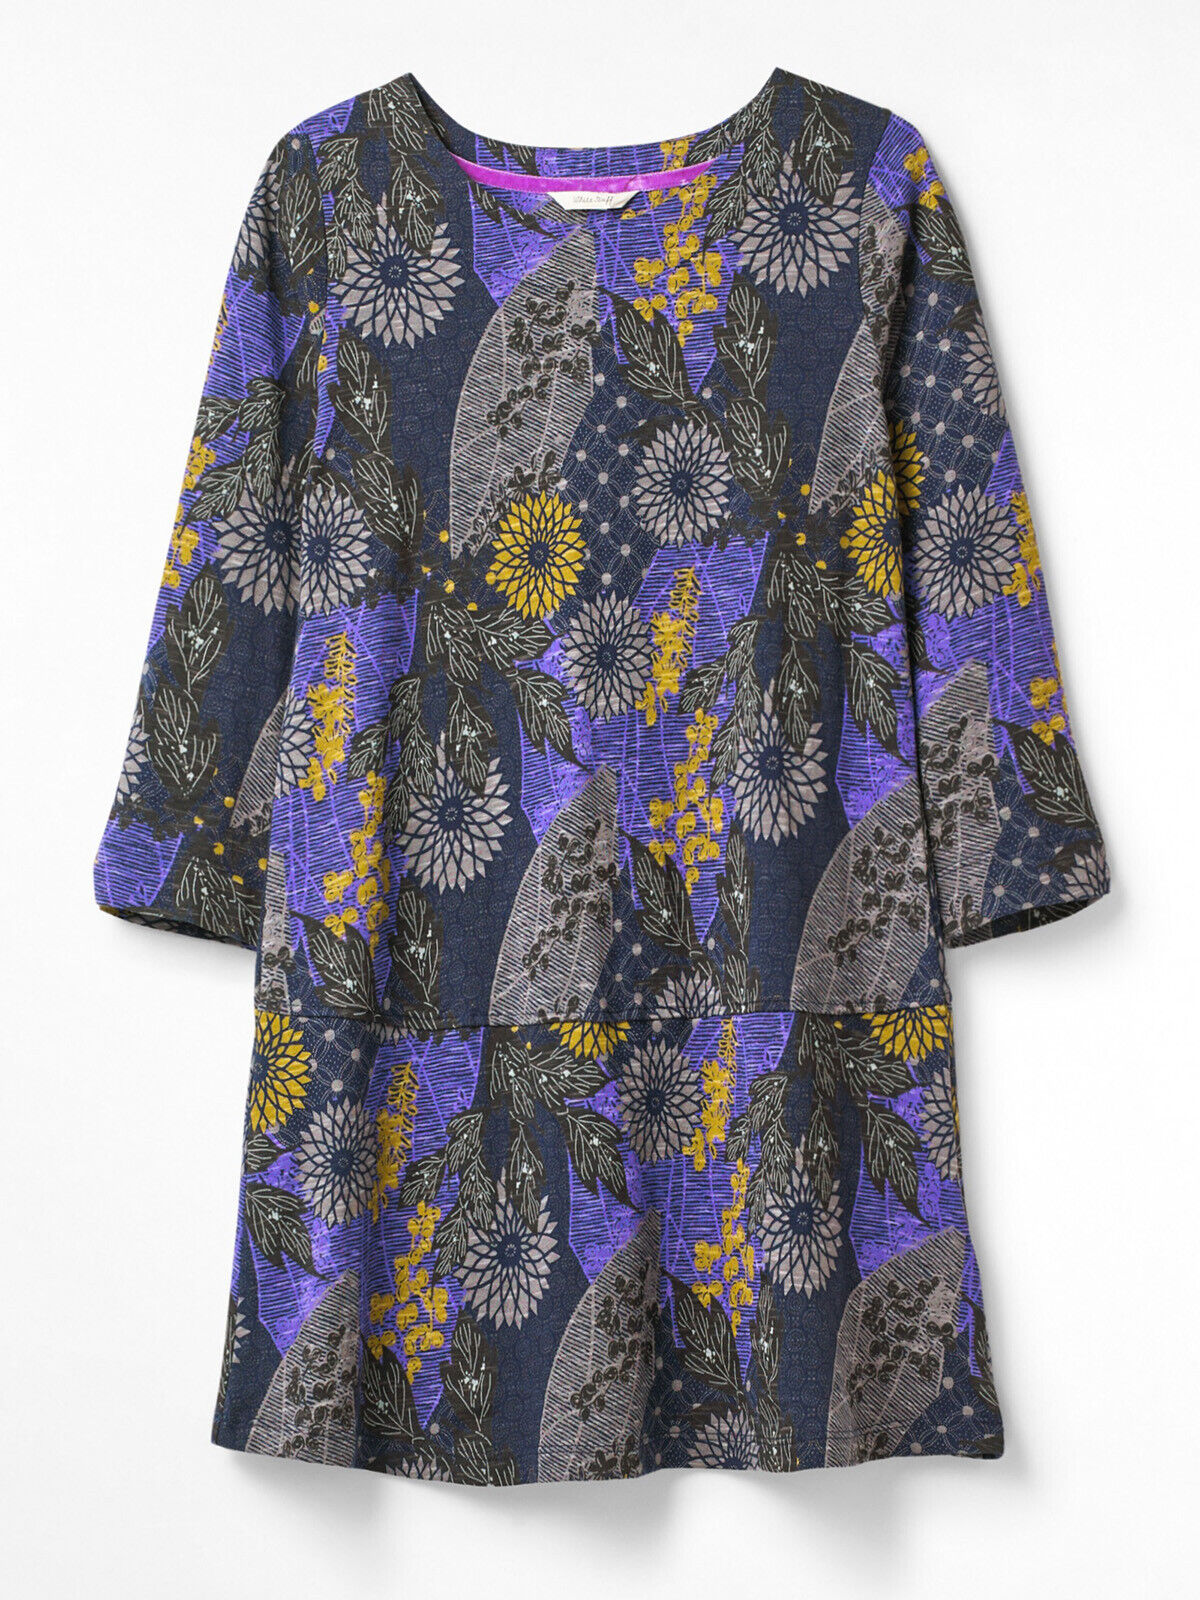 EX WHITE STUFF Purple Fruitful Jersey Tunic in Sizes 8 or 10 RRP £49.95